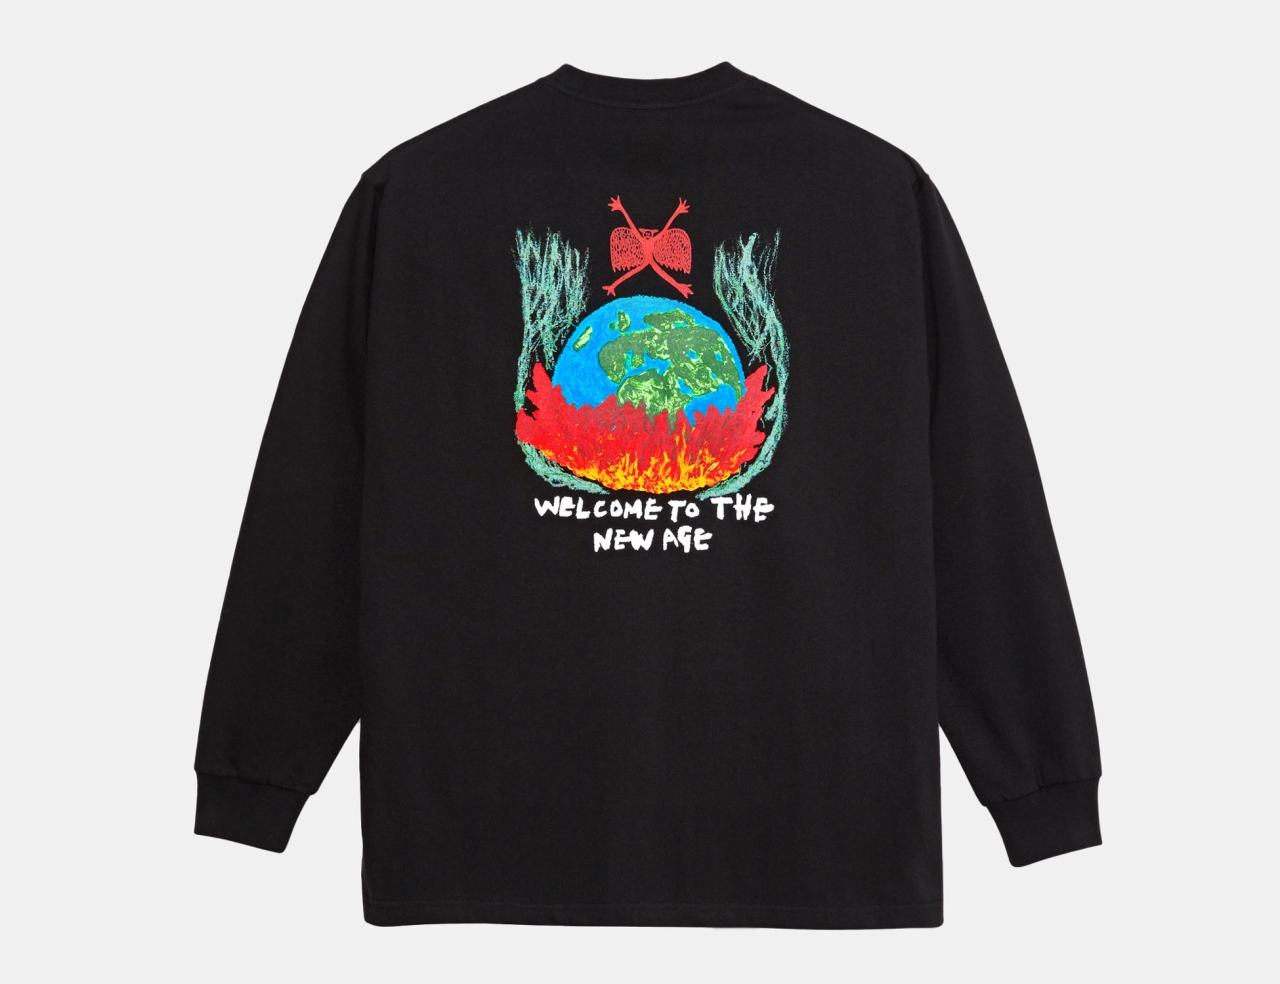 Polar Skate Co. Welcome To The New Age Longsleeve - Black